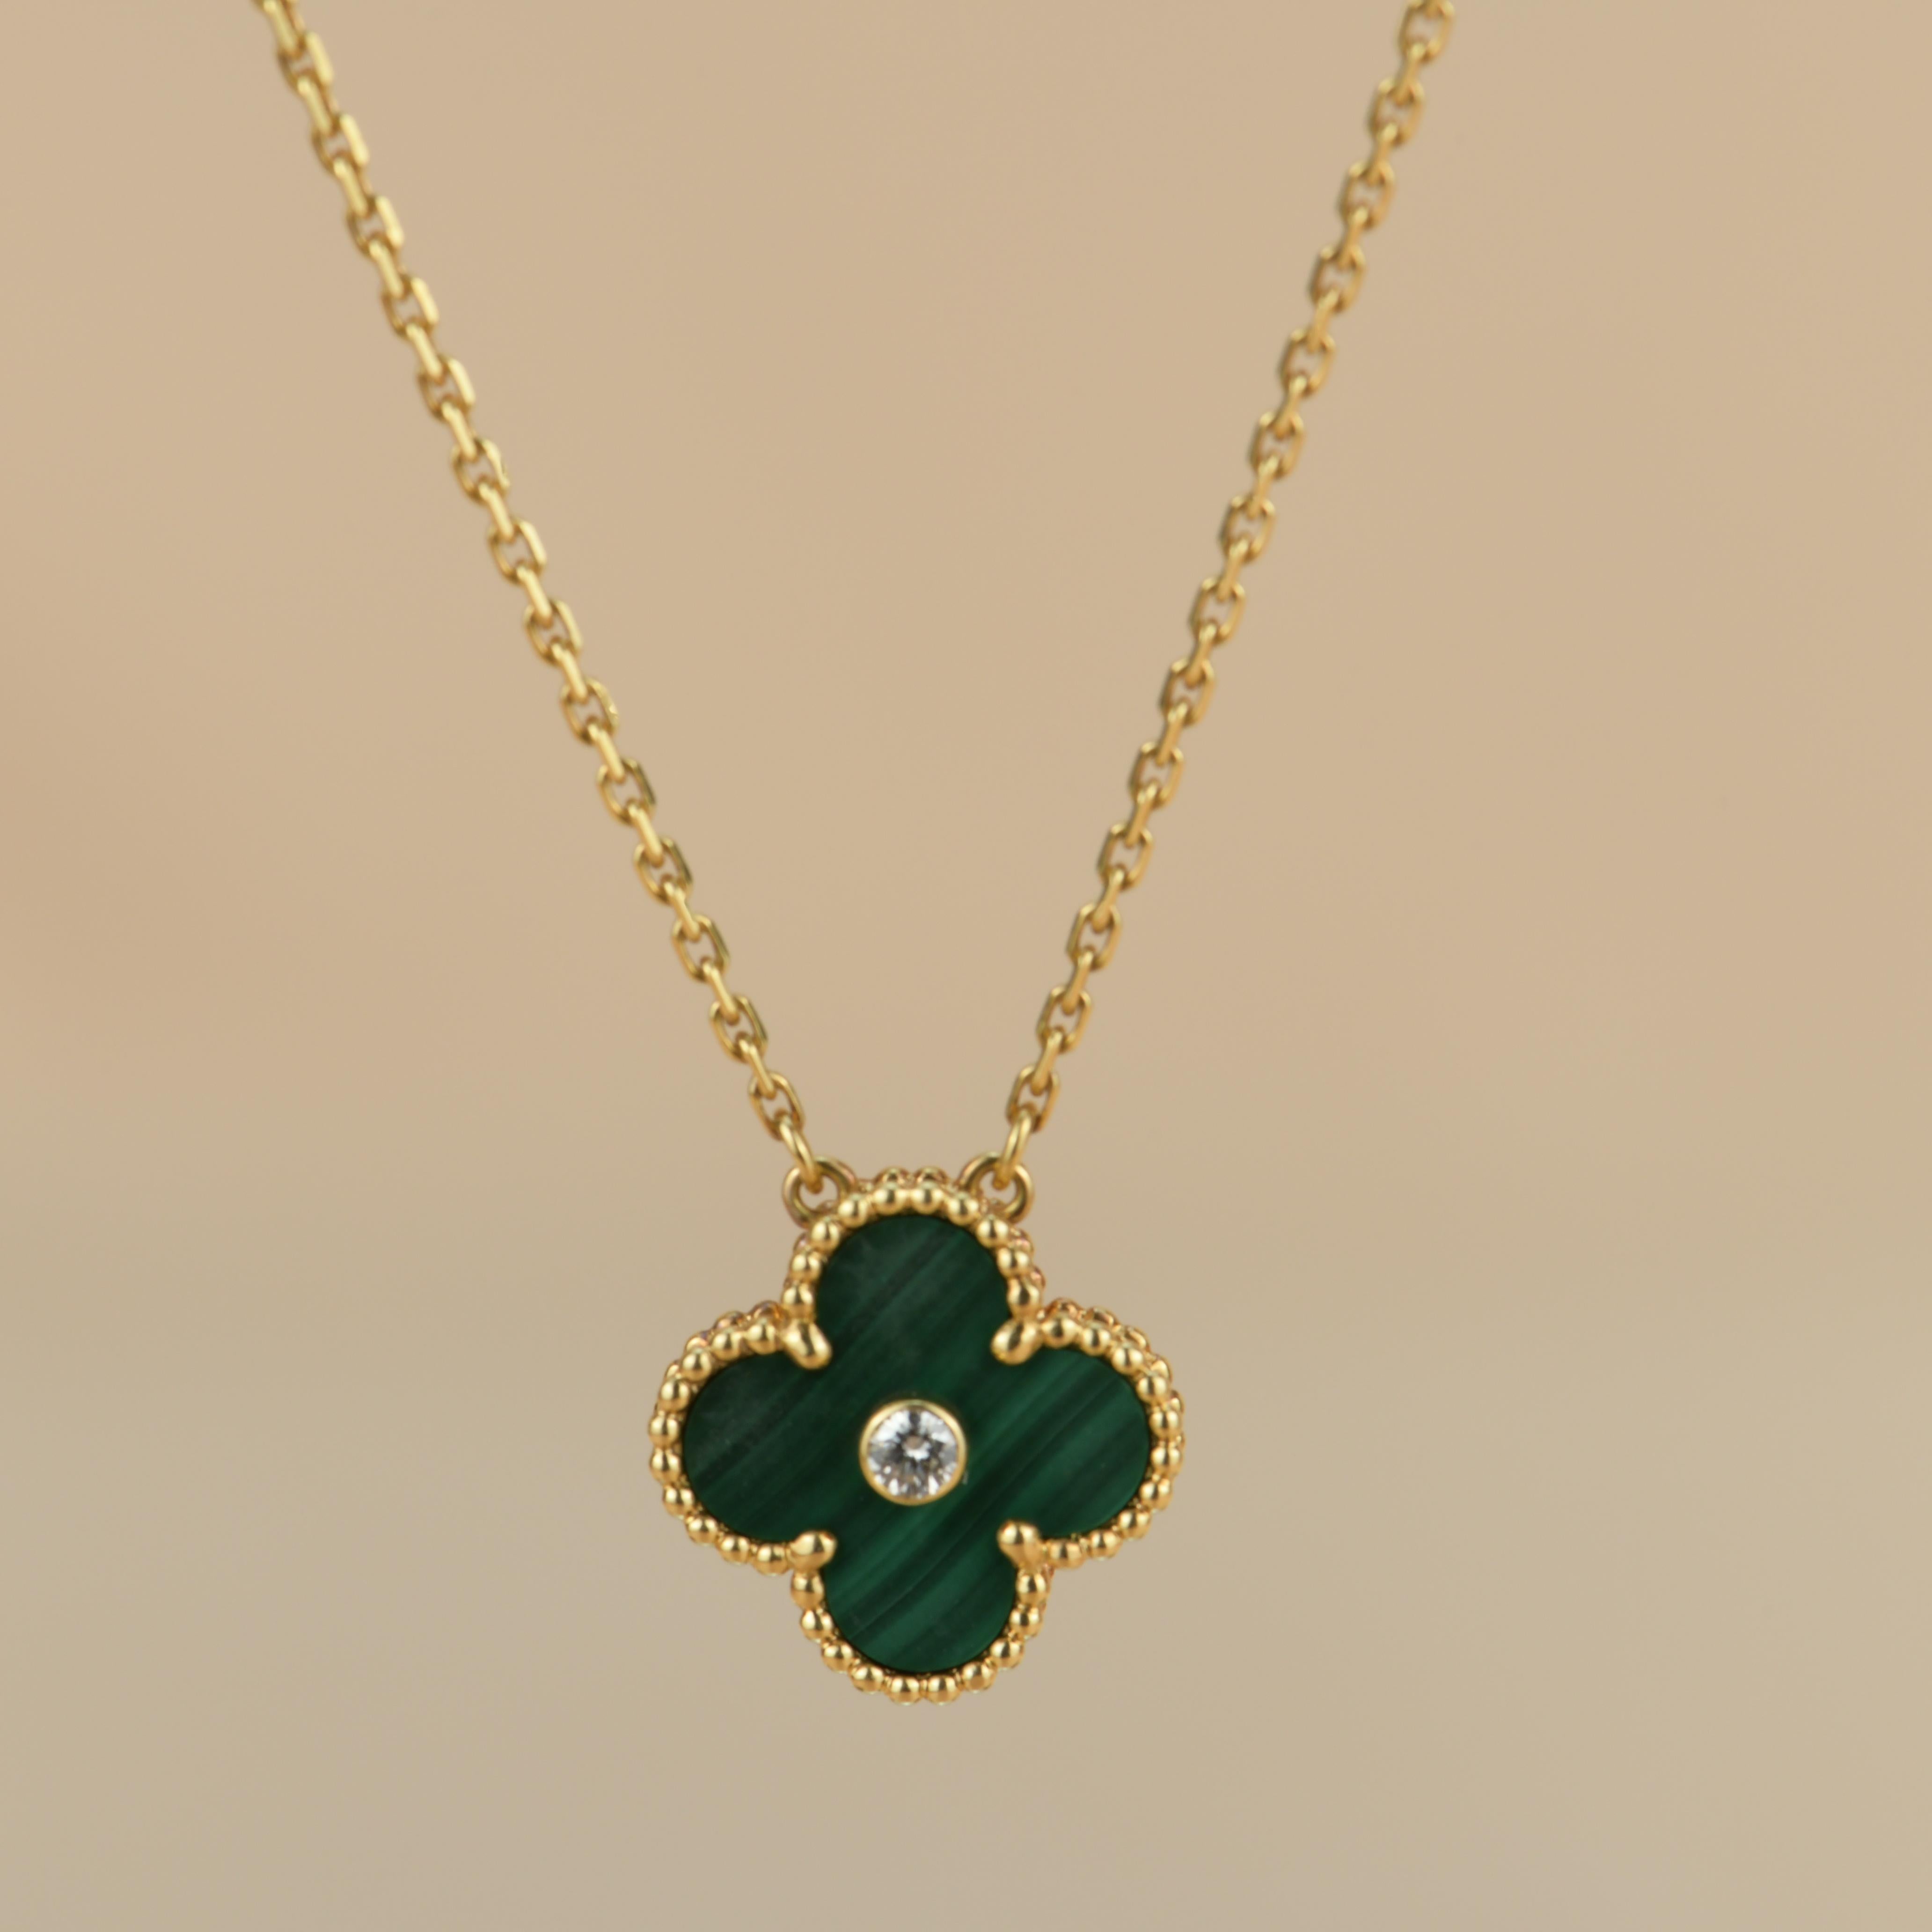 Gorgeous Limited edition released in 2013 Christmas as the holiday pendant.

Dandelion Antiques Code	AT-0939
Brand	                                Van Cleef & Arpels
Model	                                VCAR049S00
Serial No	                        